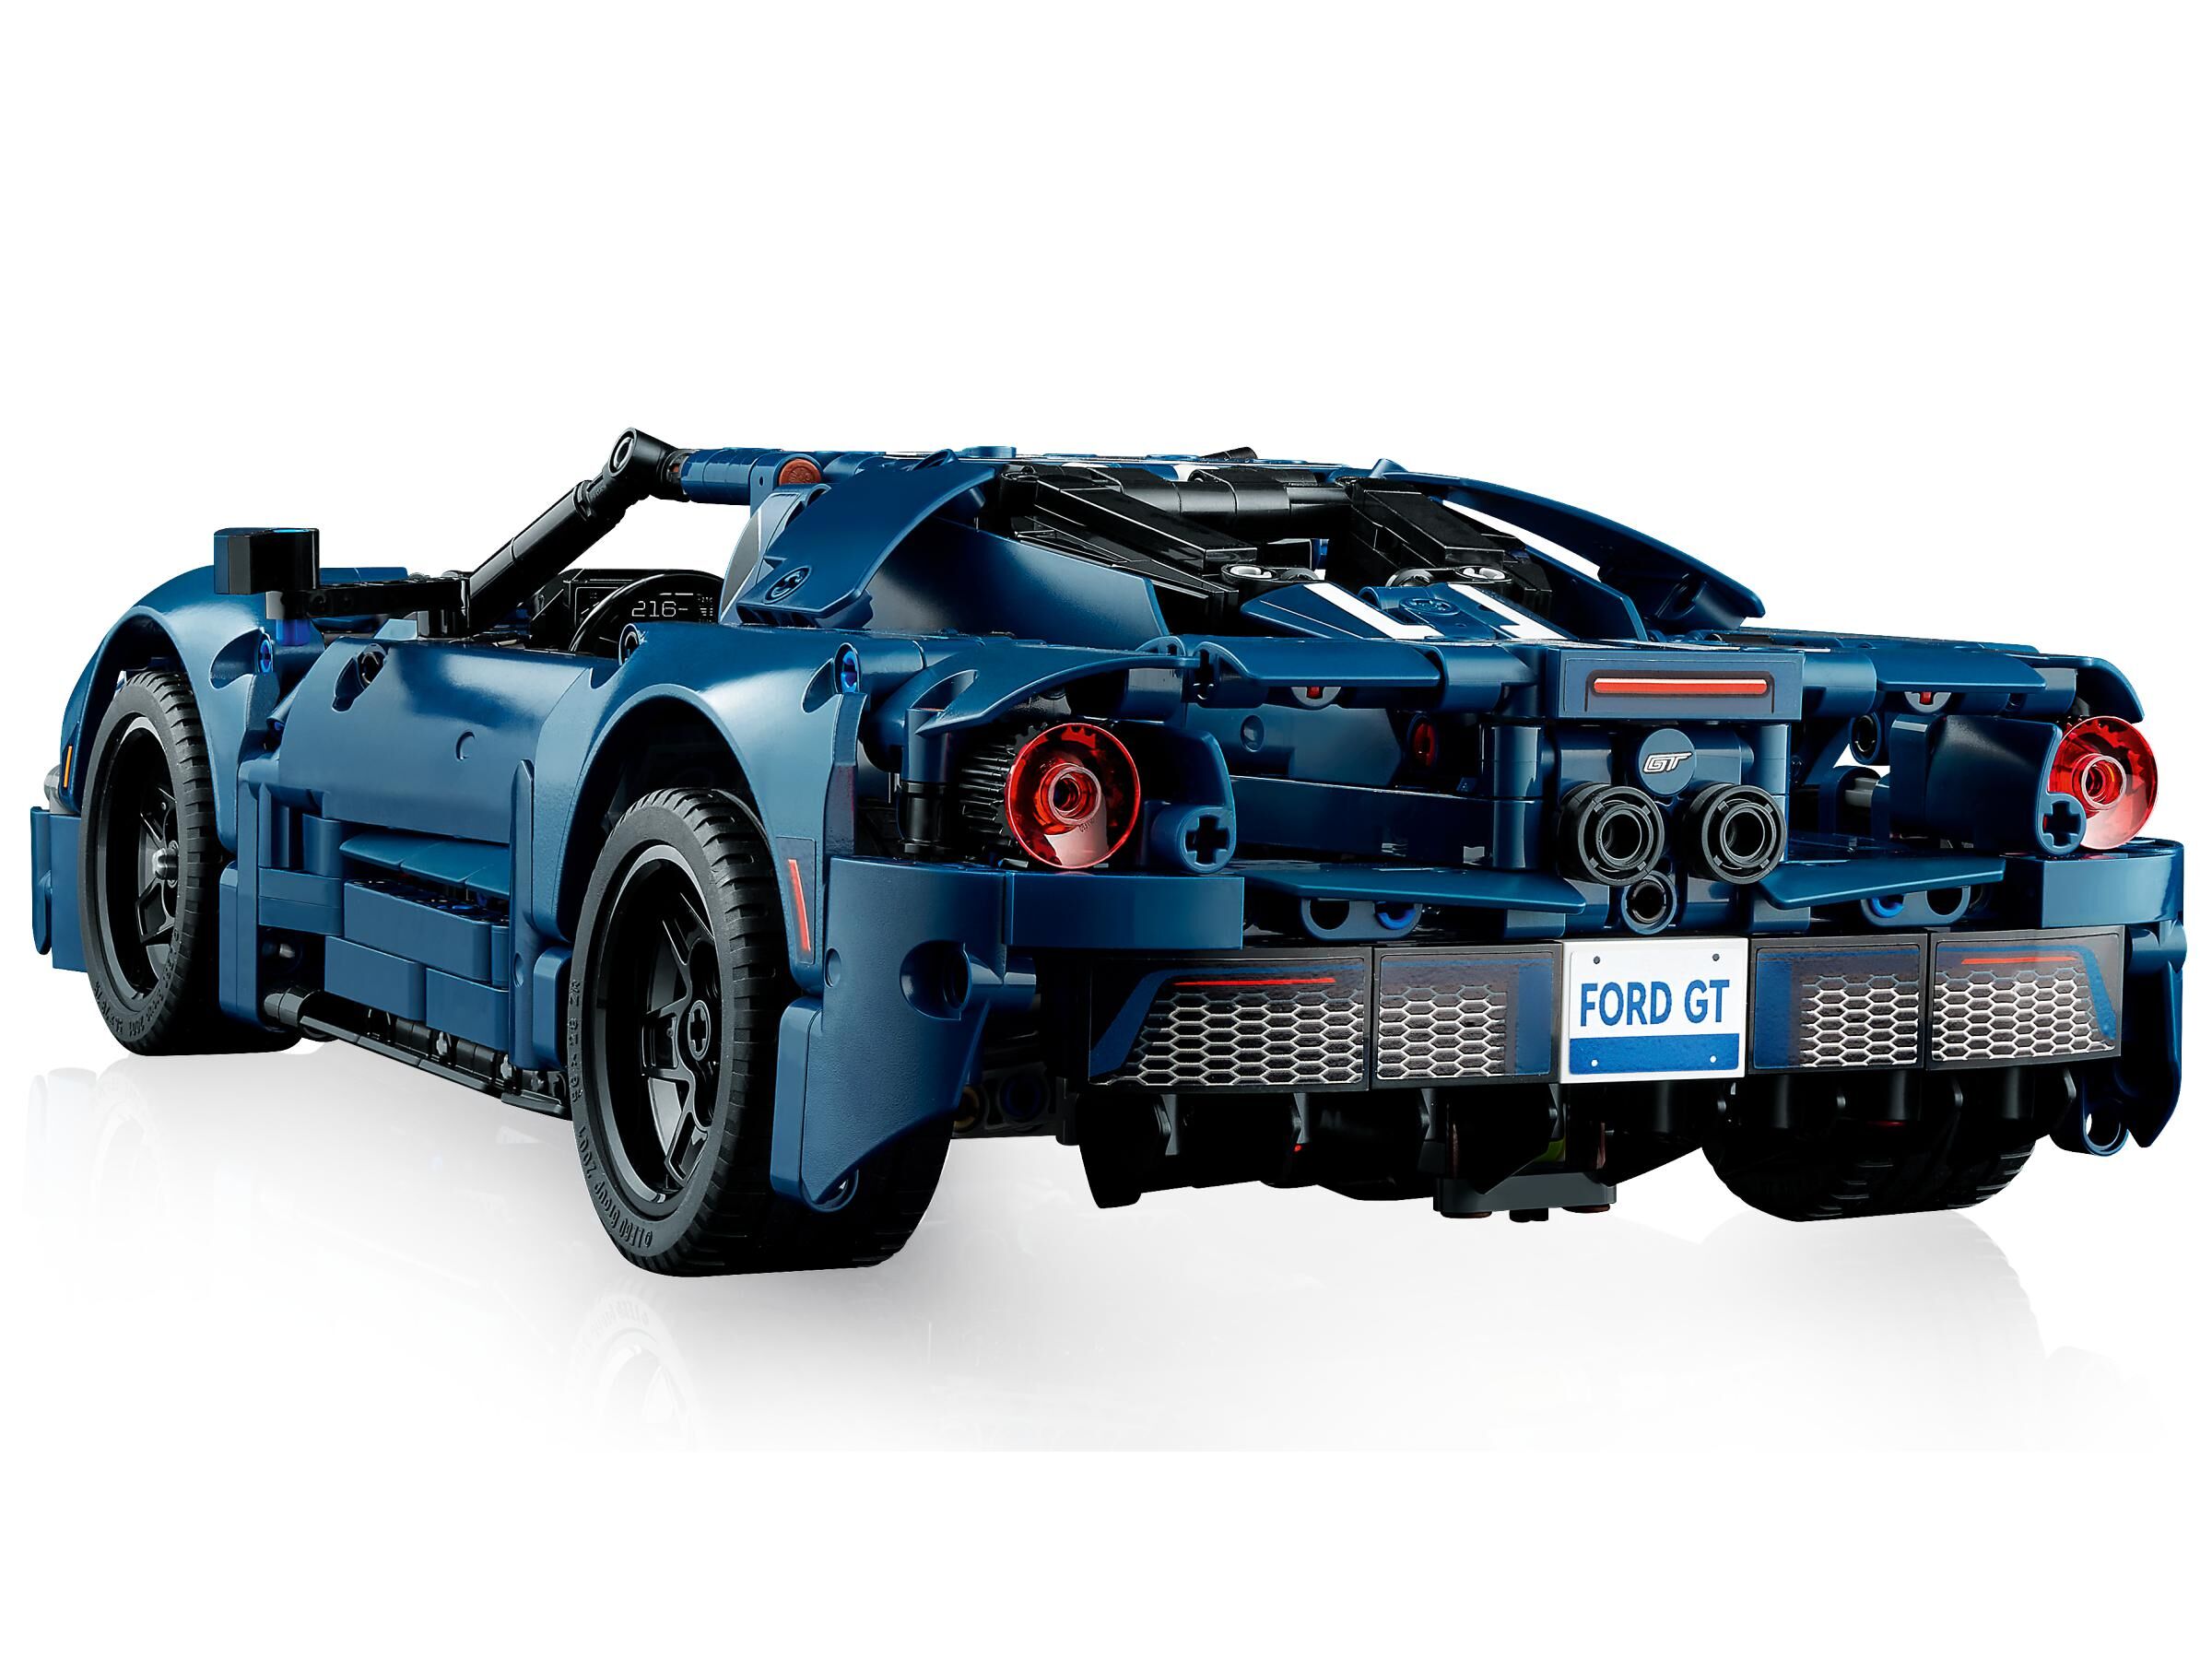  LEGO Technic 2022 Ford GT 42154 Car Model Kit for Adults to  Build, Collectible Set, 1:12 Scale Supercar with Authentic Features, Gift  Idea That Fuels Creativity and Imagination : Toys & Games